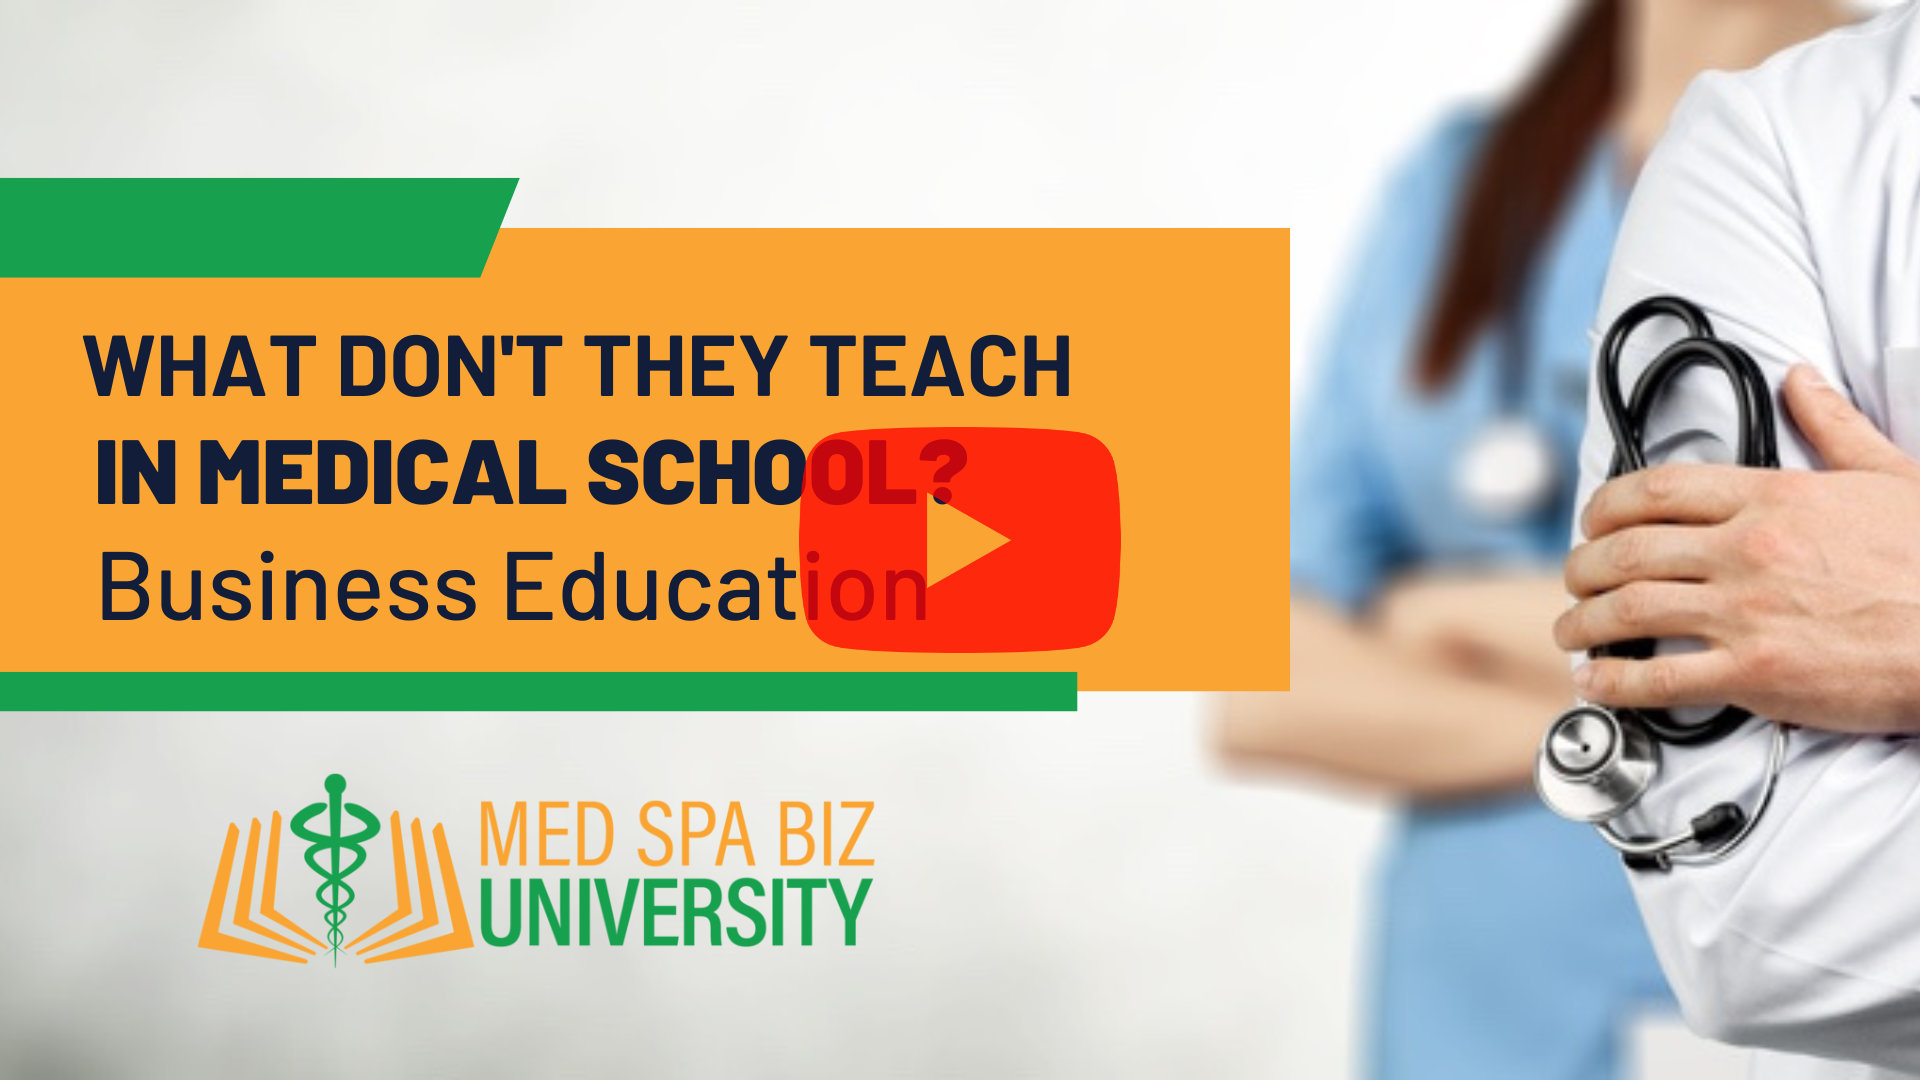 What Don't They Teach in Medical School? Business Education